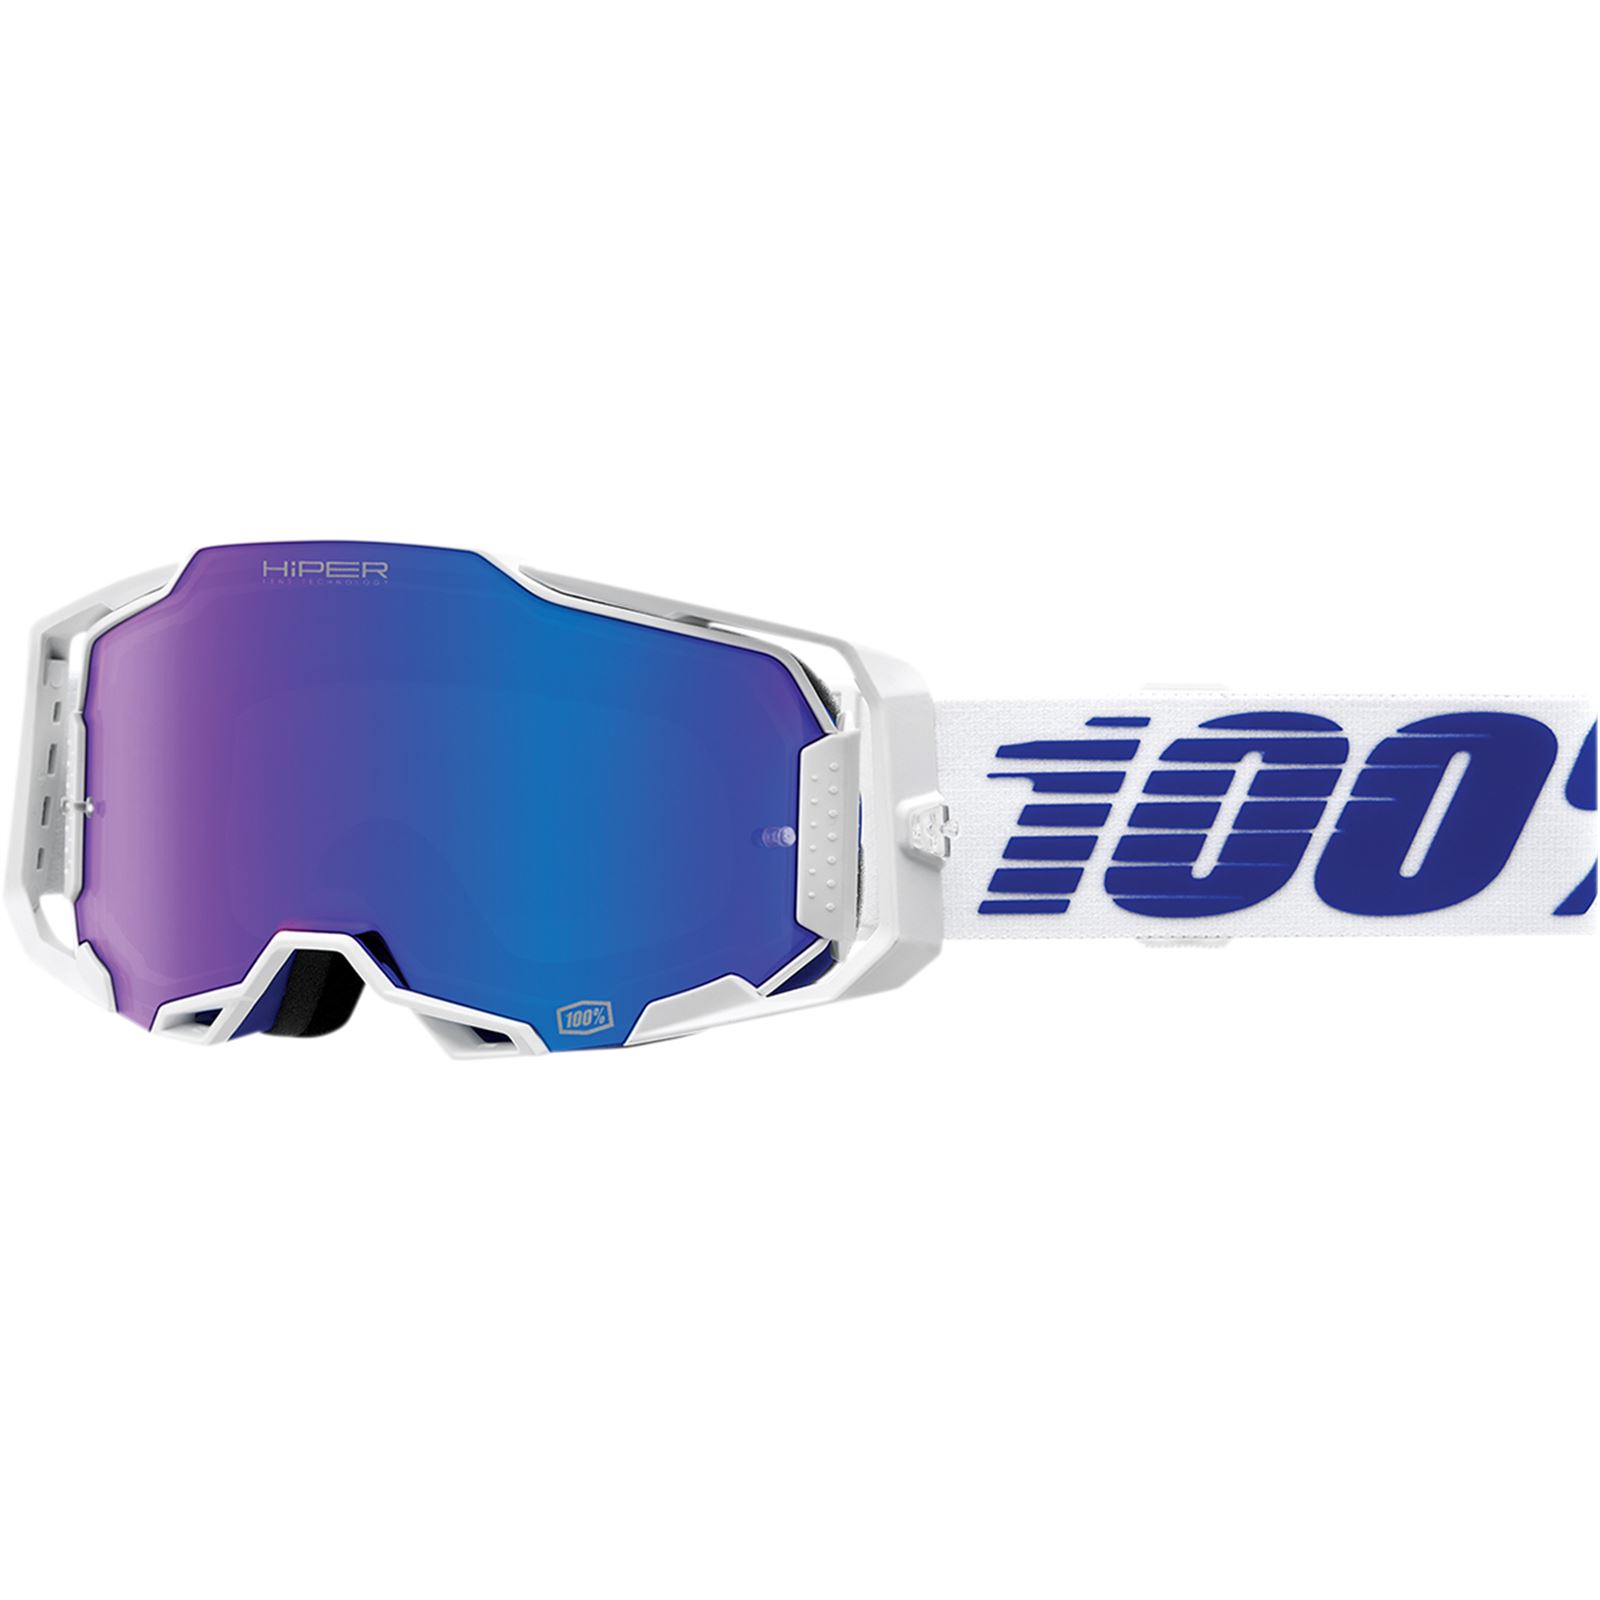 GOGGLE SHOP TEAR OFF LENS TO FIT 100% MOTOCROSS GOGGLES MIRROR BLUE 